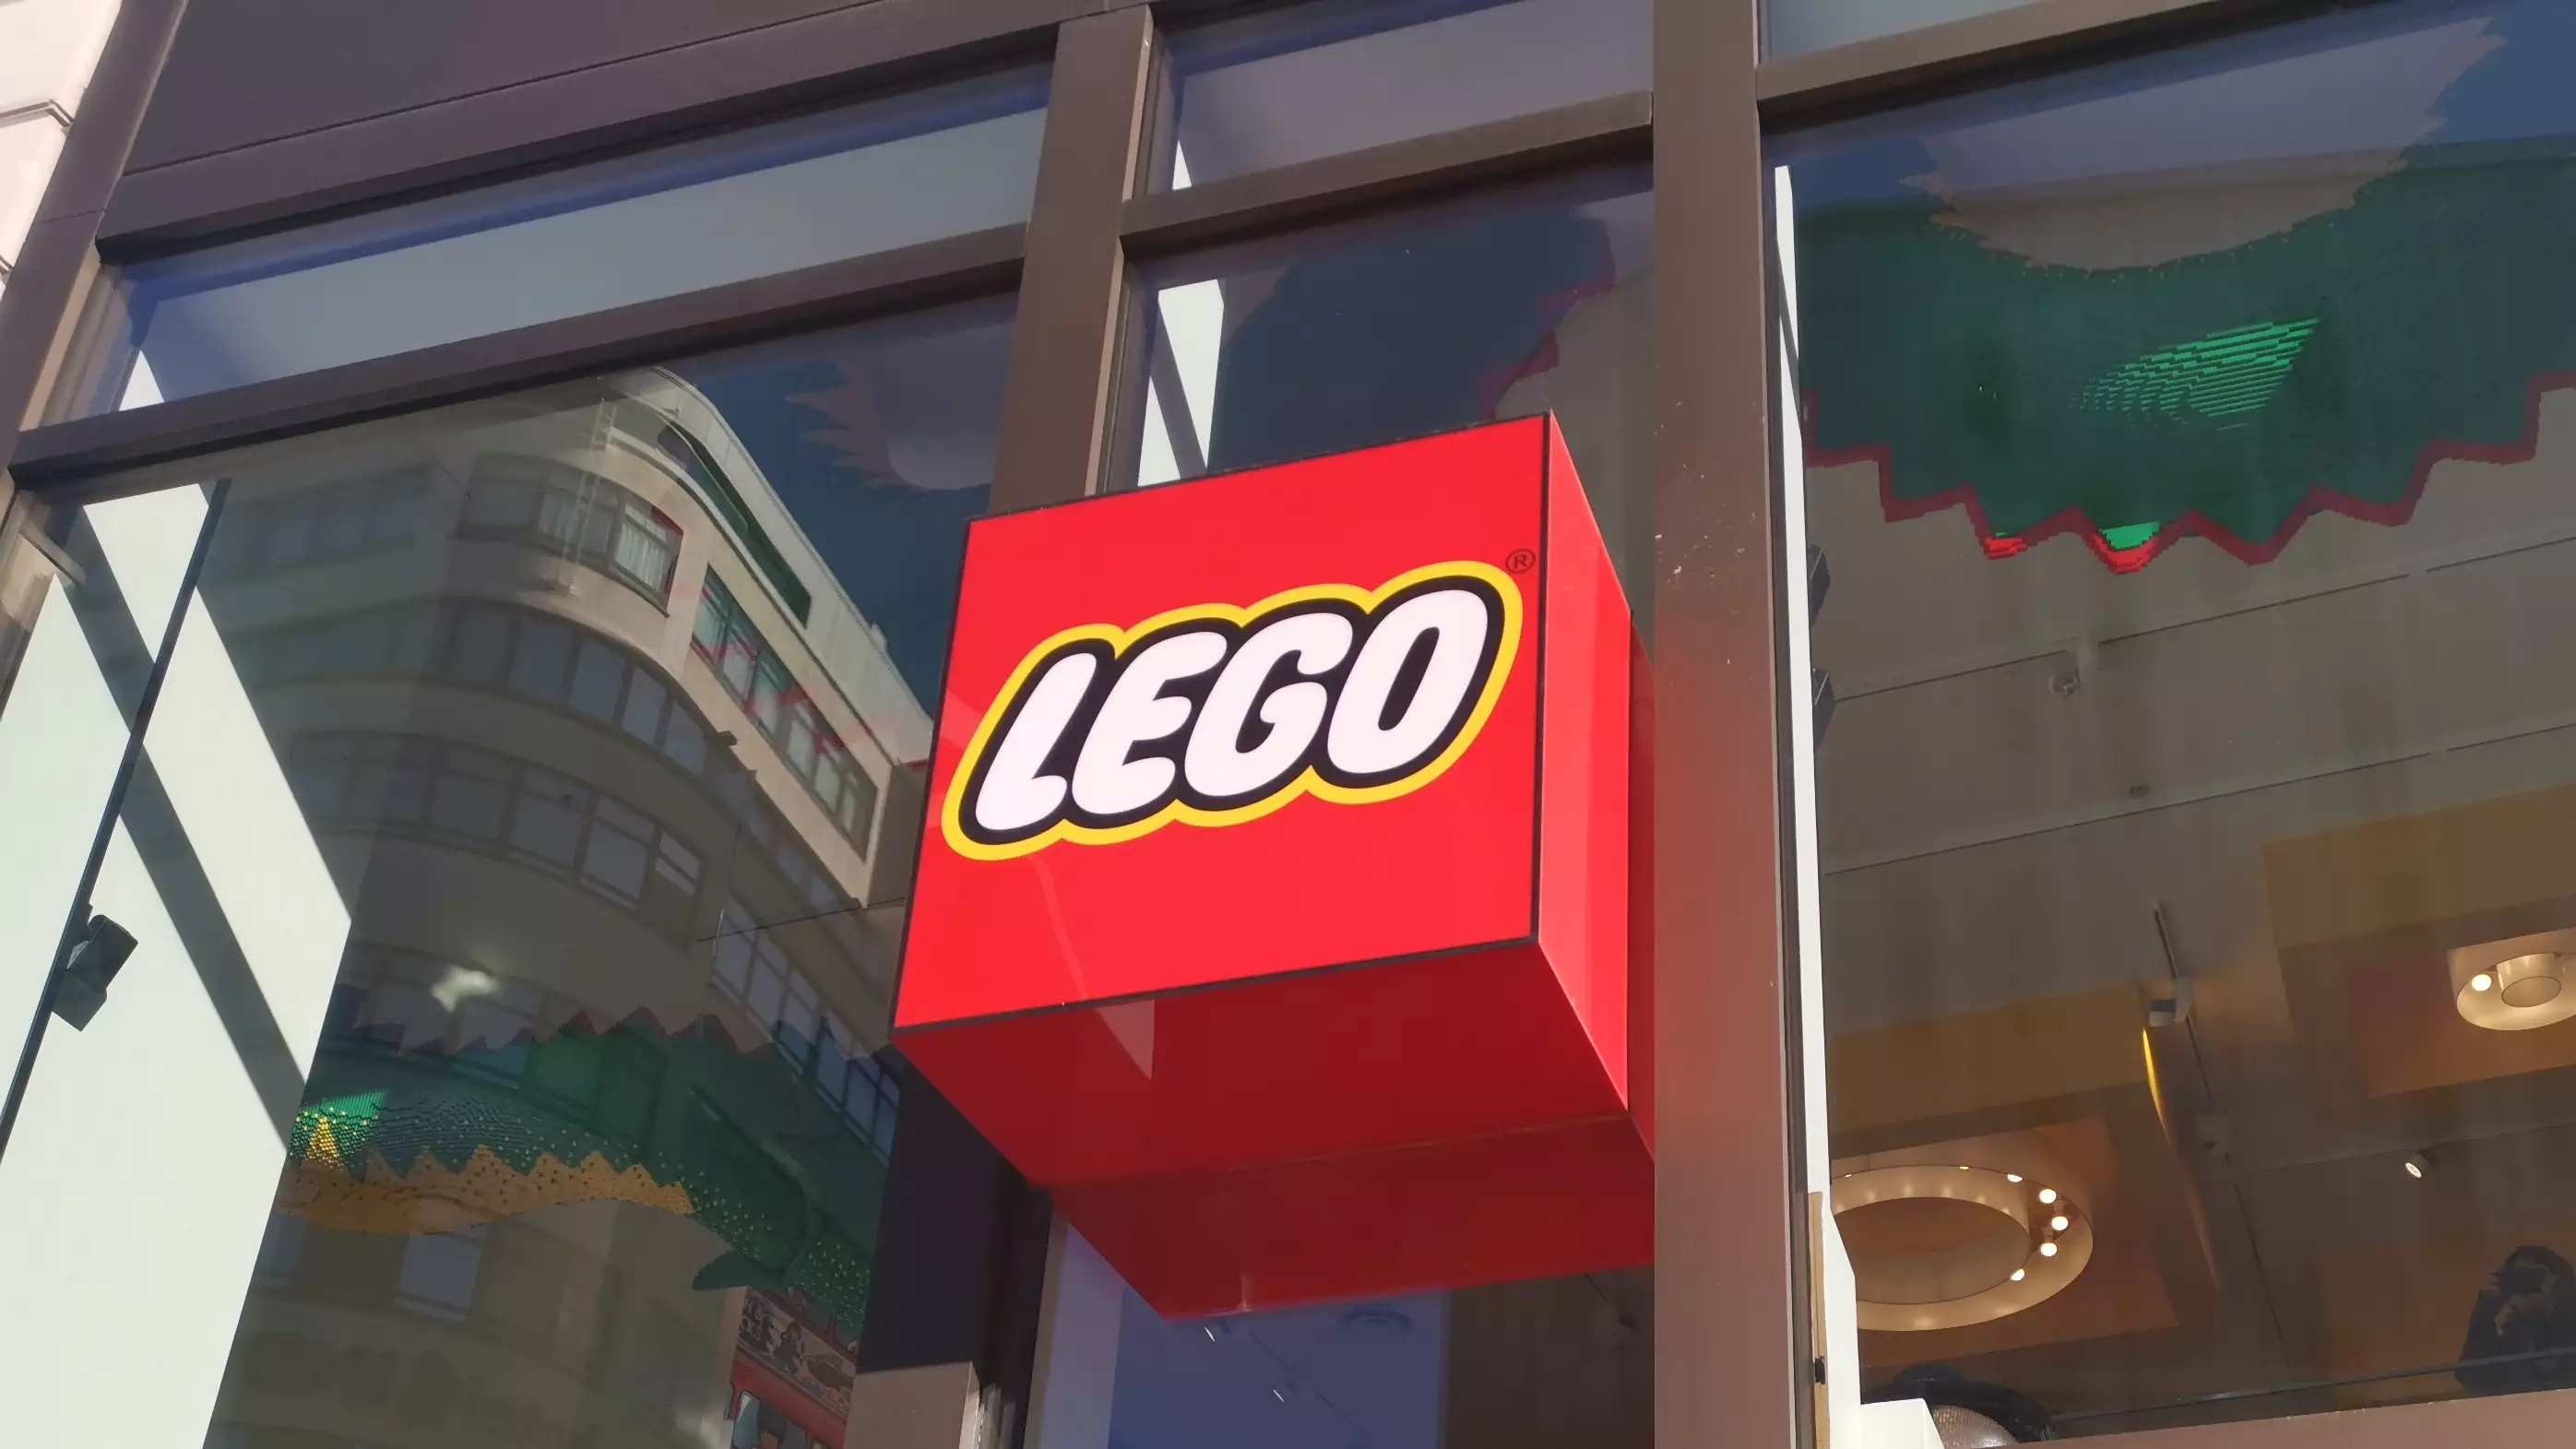 Perth Apprentice Planning To Buy $20,000 Worth Of Lego After Winning Lottery